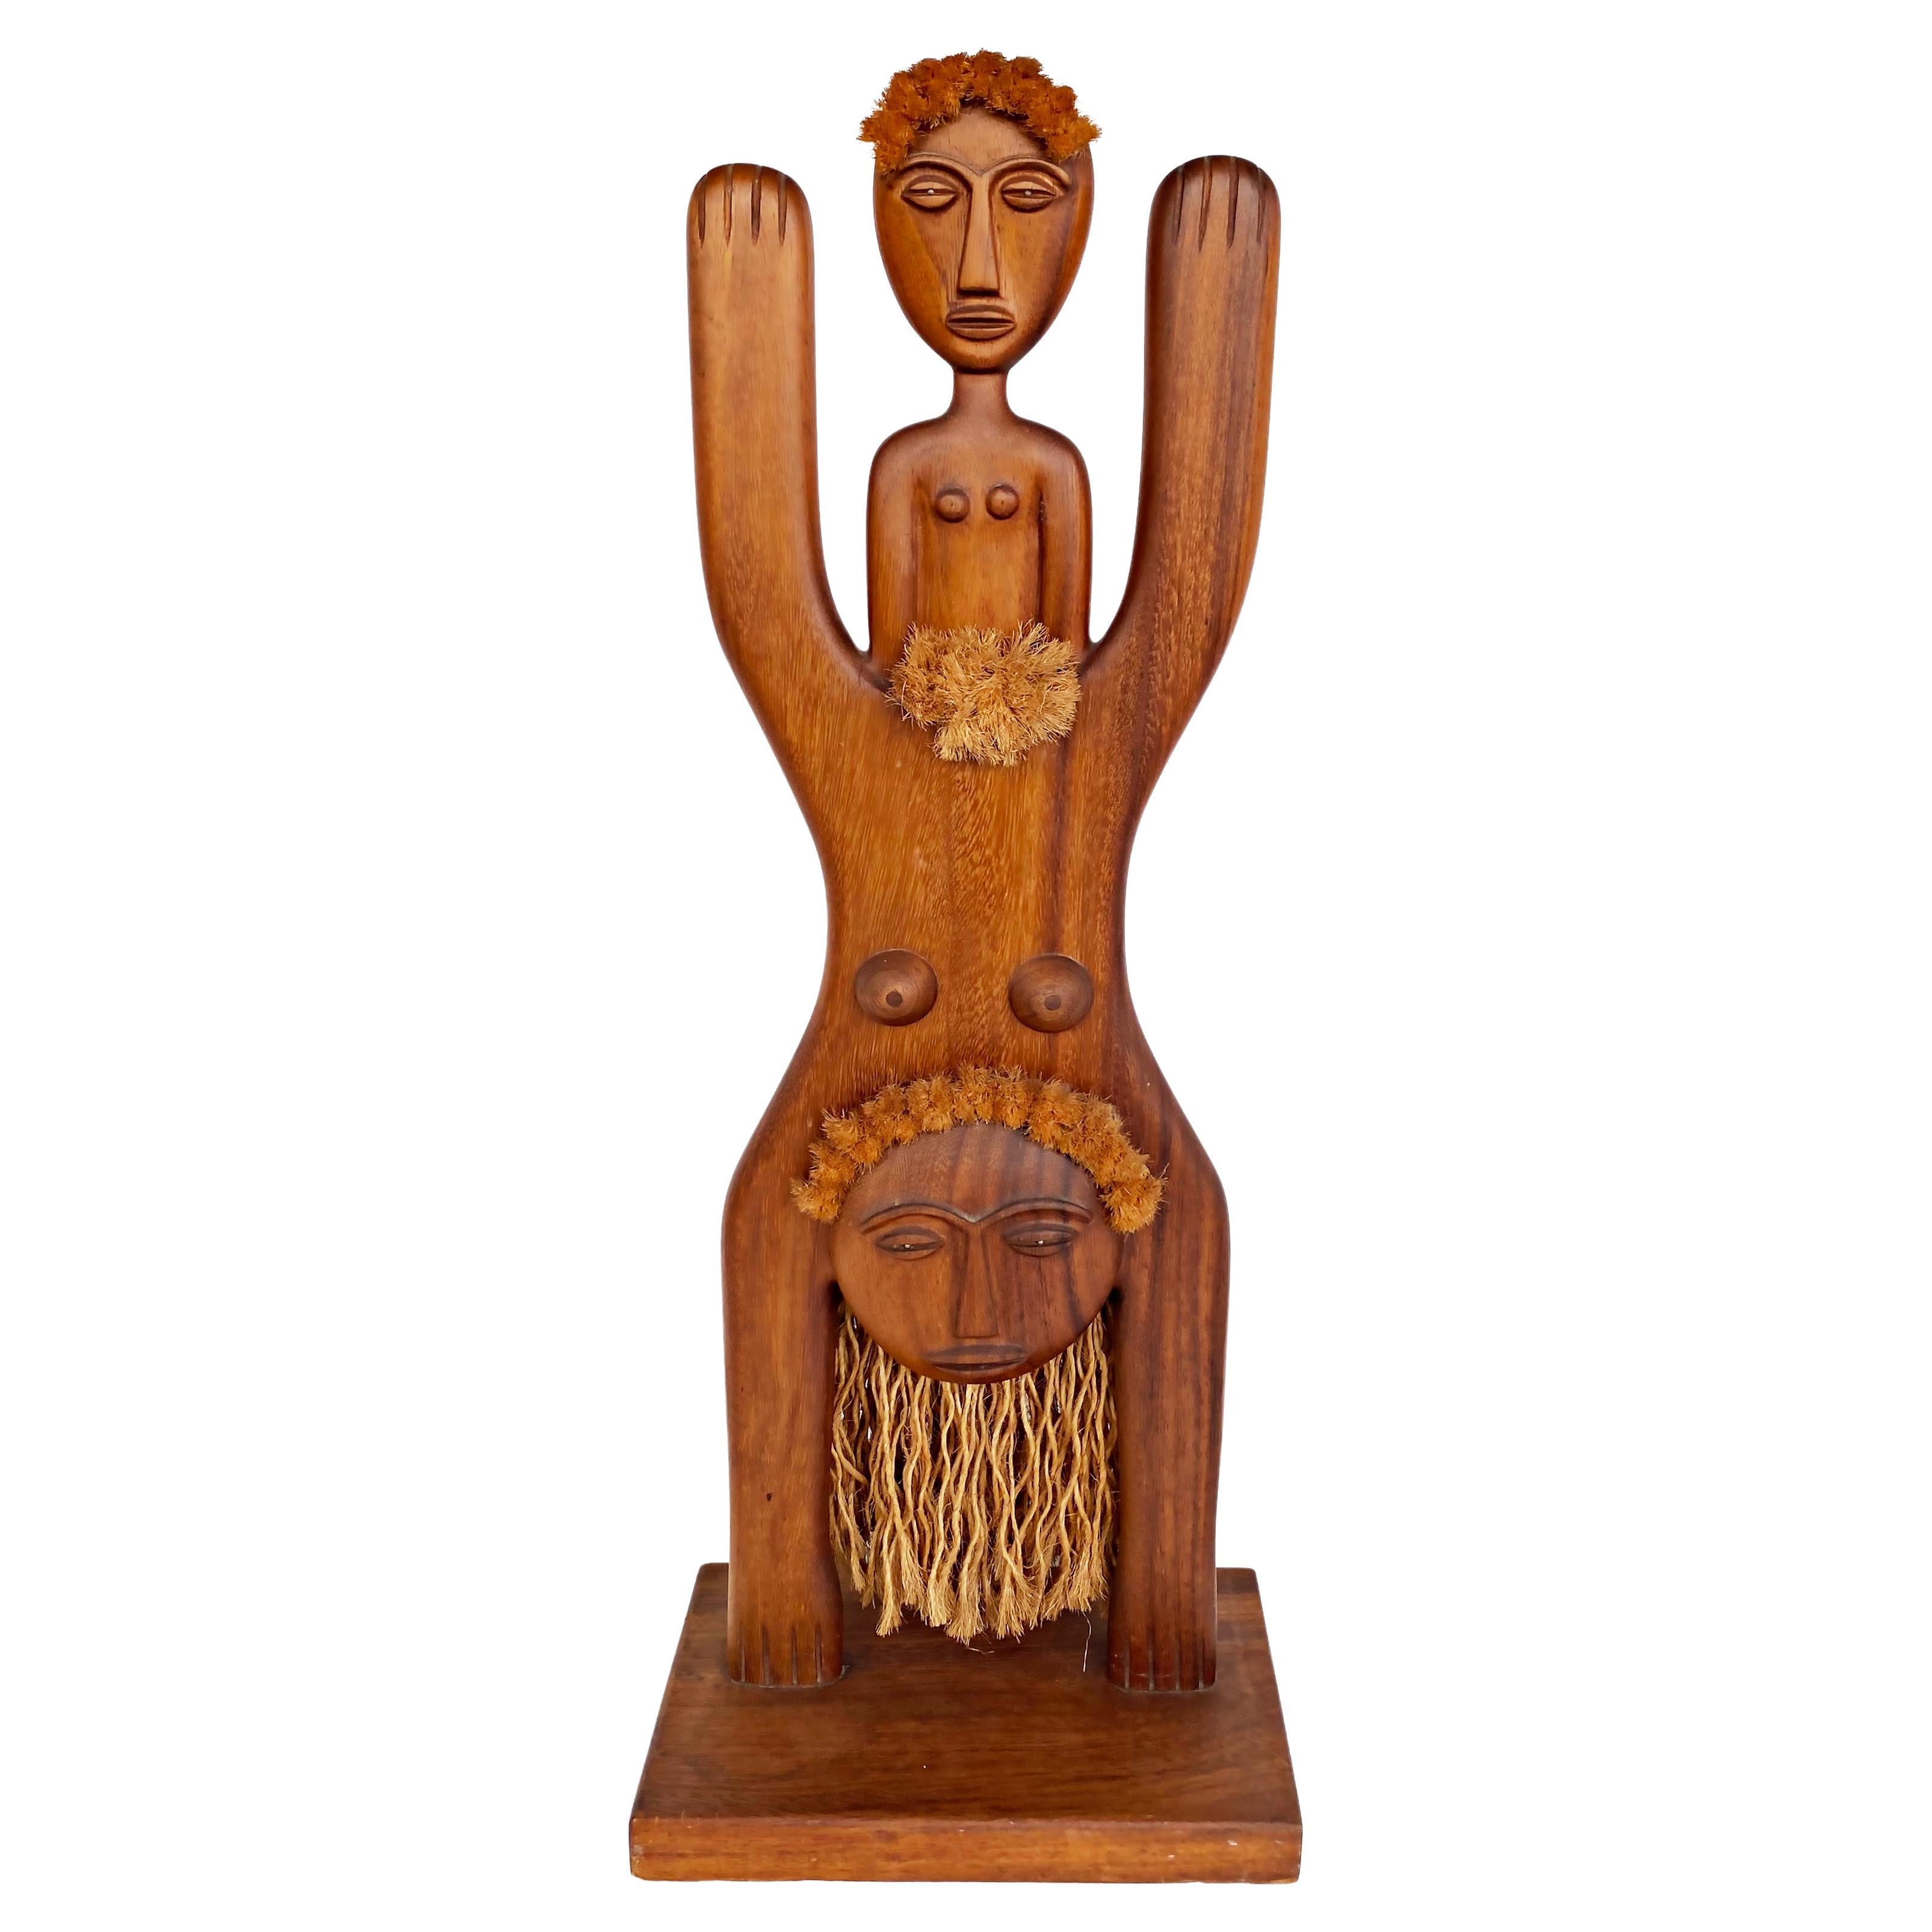  1978 Carved Wood Fertility Sculpture by Edwin Scheier, Signed For Sale